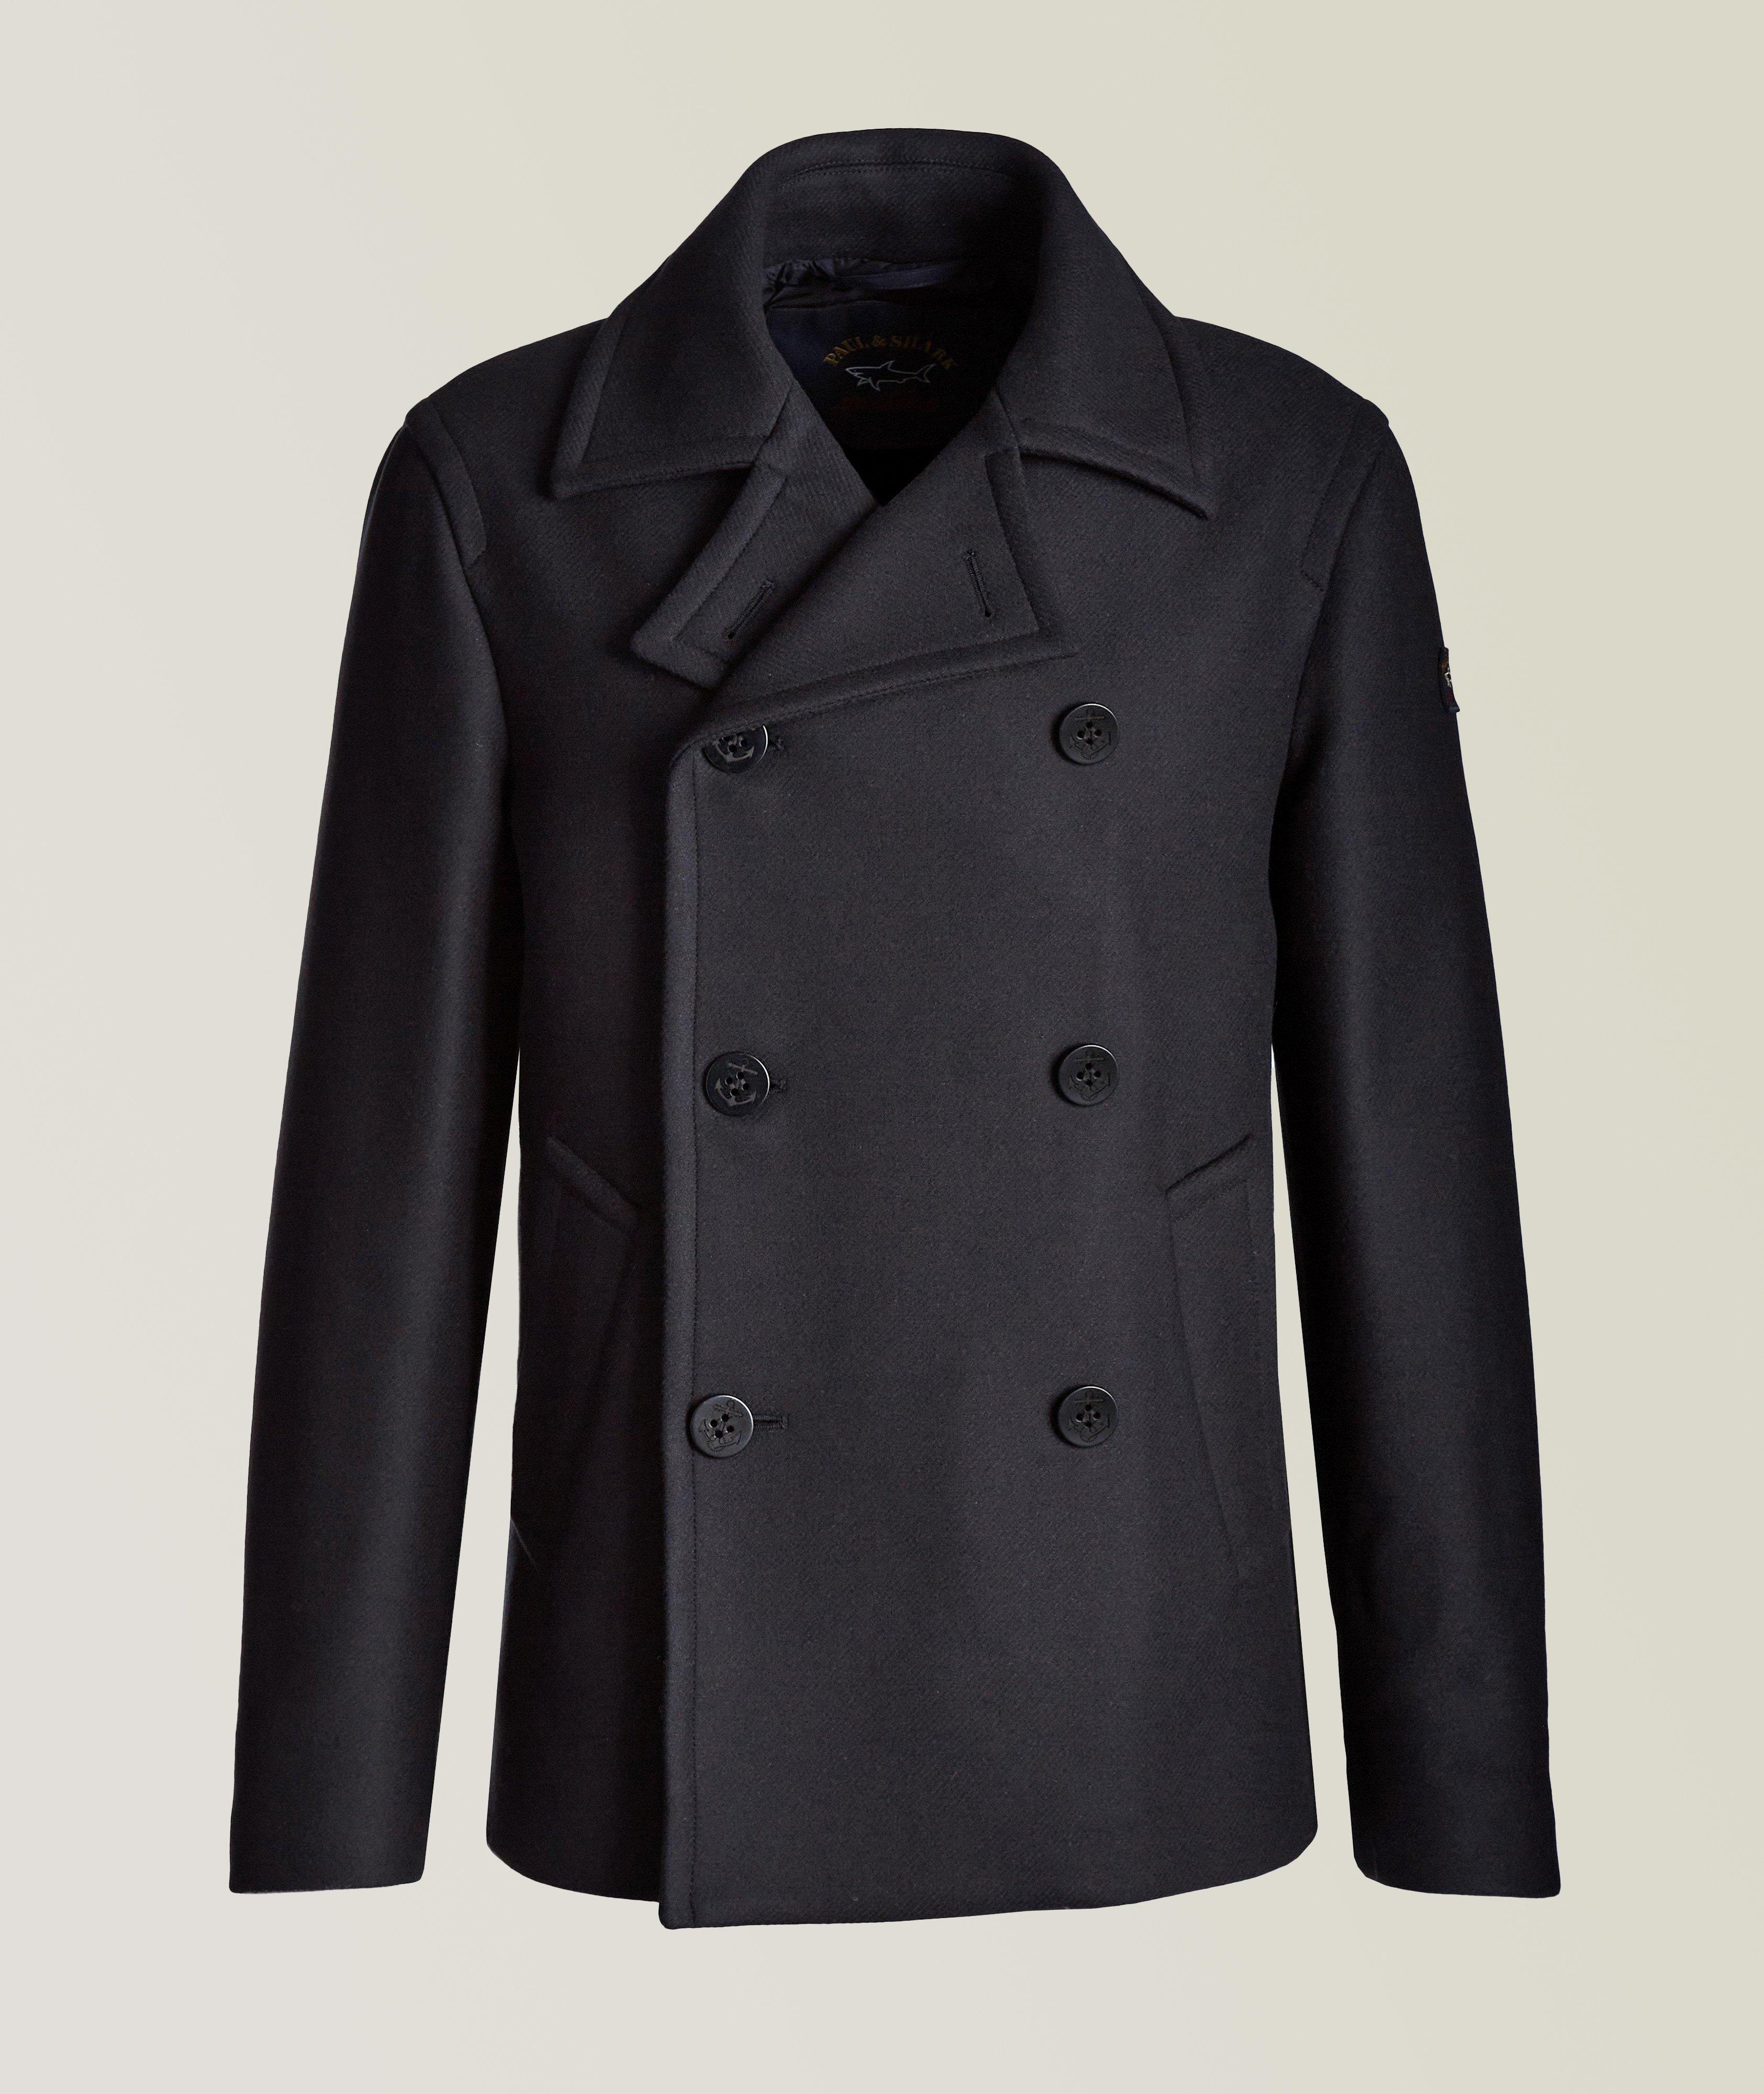 Wool-Cashmere Blend Peacoat image 0